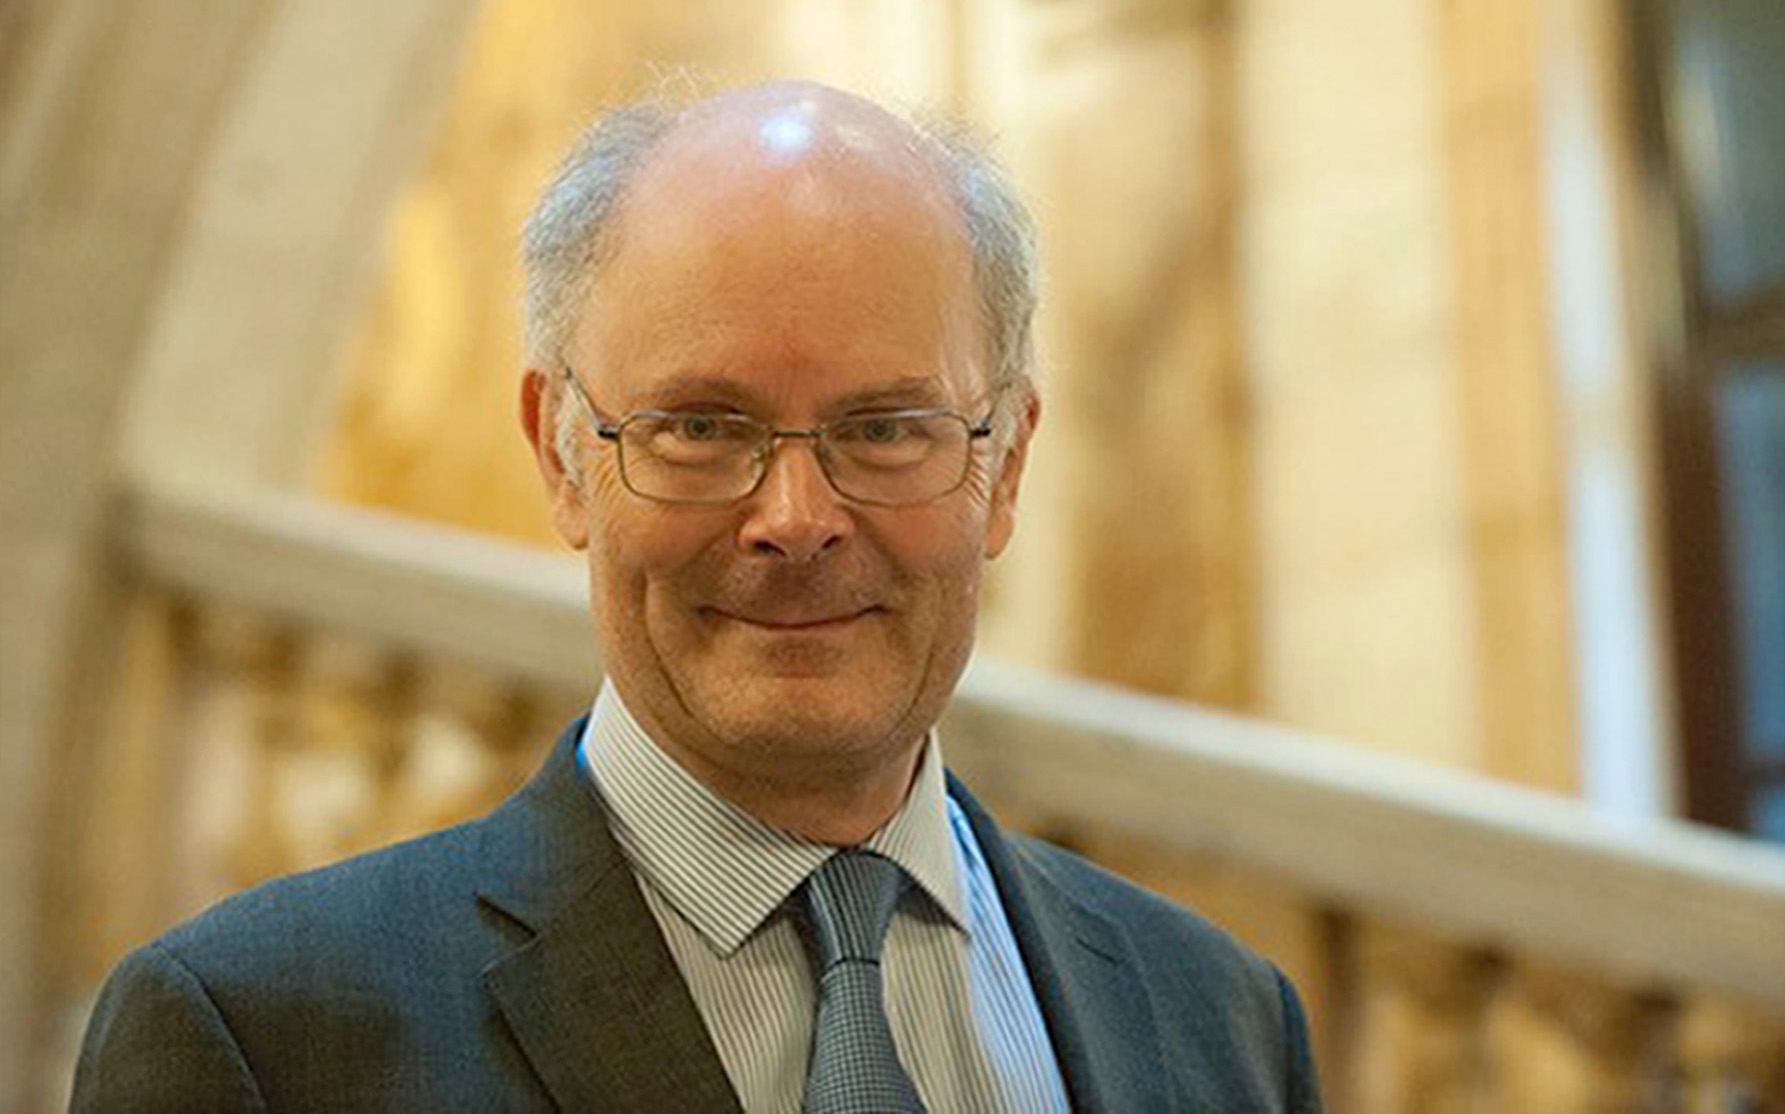 Professor Sir John Curtice smiling, pictured in front of a staircase